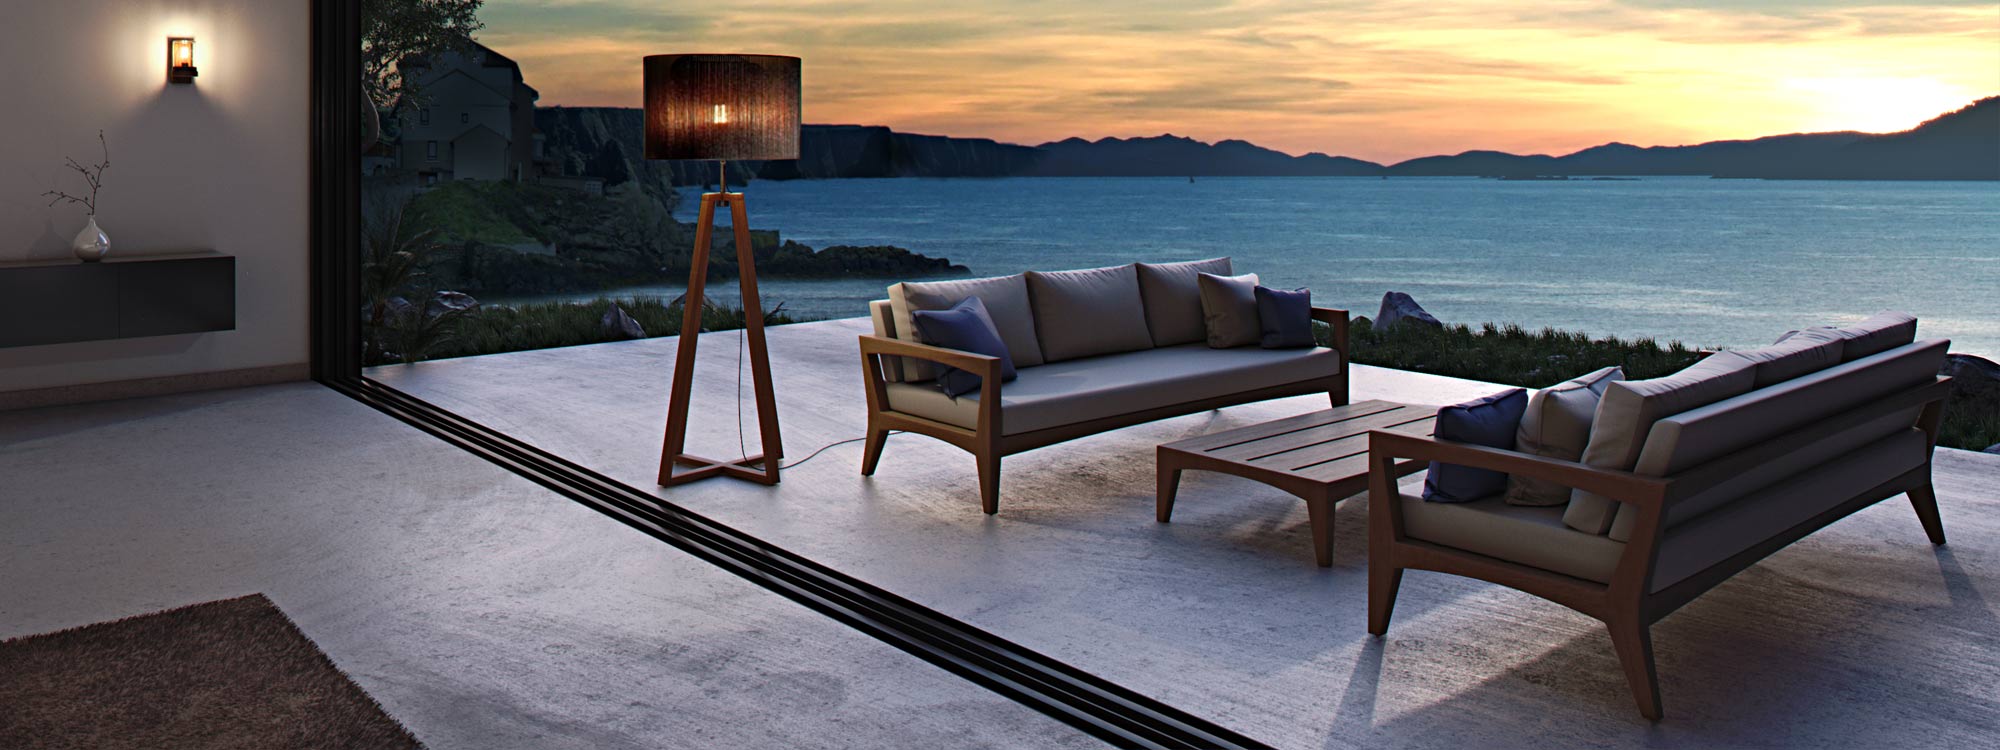 Image of Royal Botania Club outdoor floor light on terrace at dusk, with Zenhit teak garden sofas, sea and headlands in the background